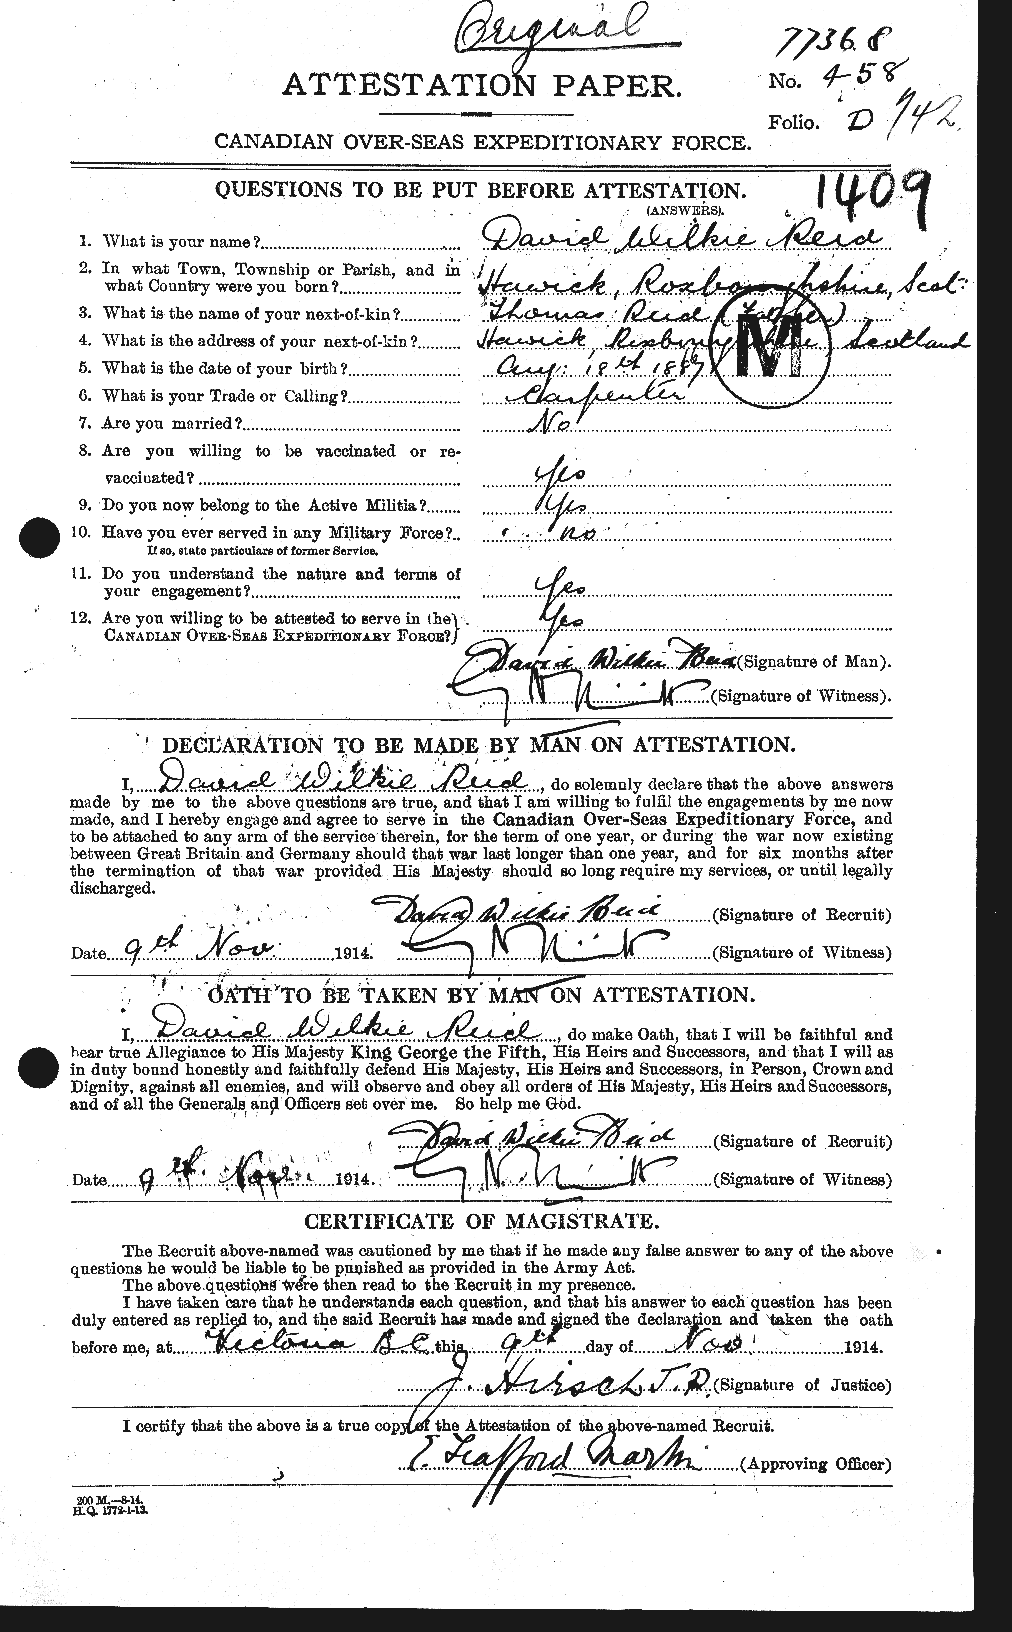 Personnel Records of the First World War - CEF 597950a